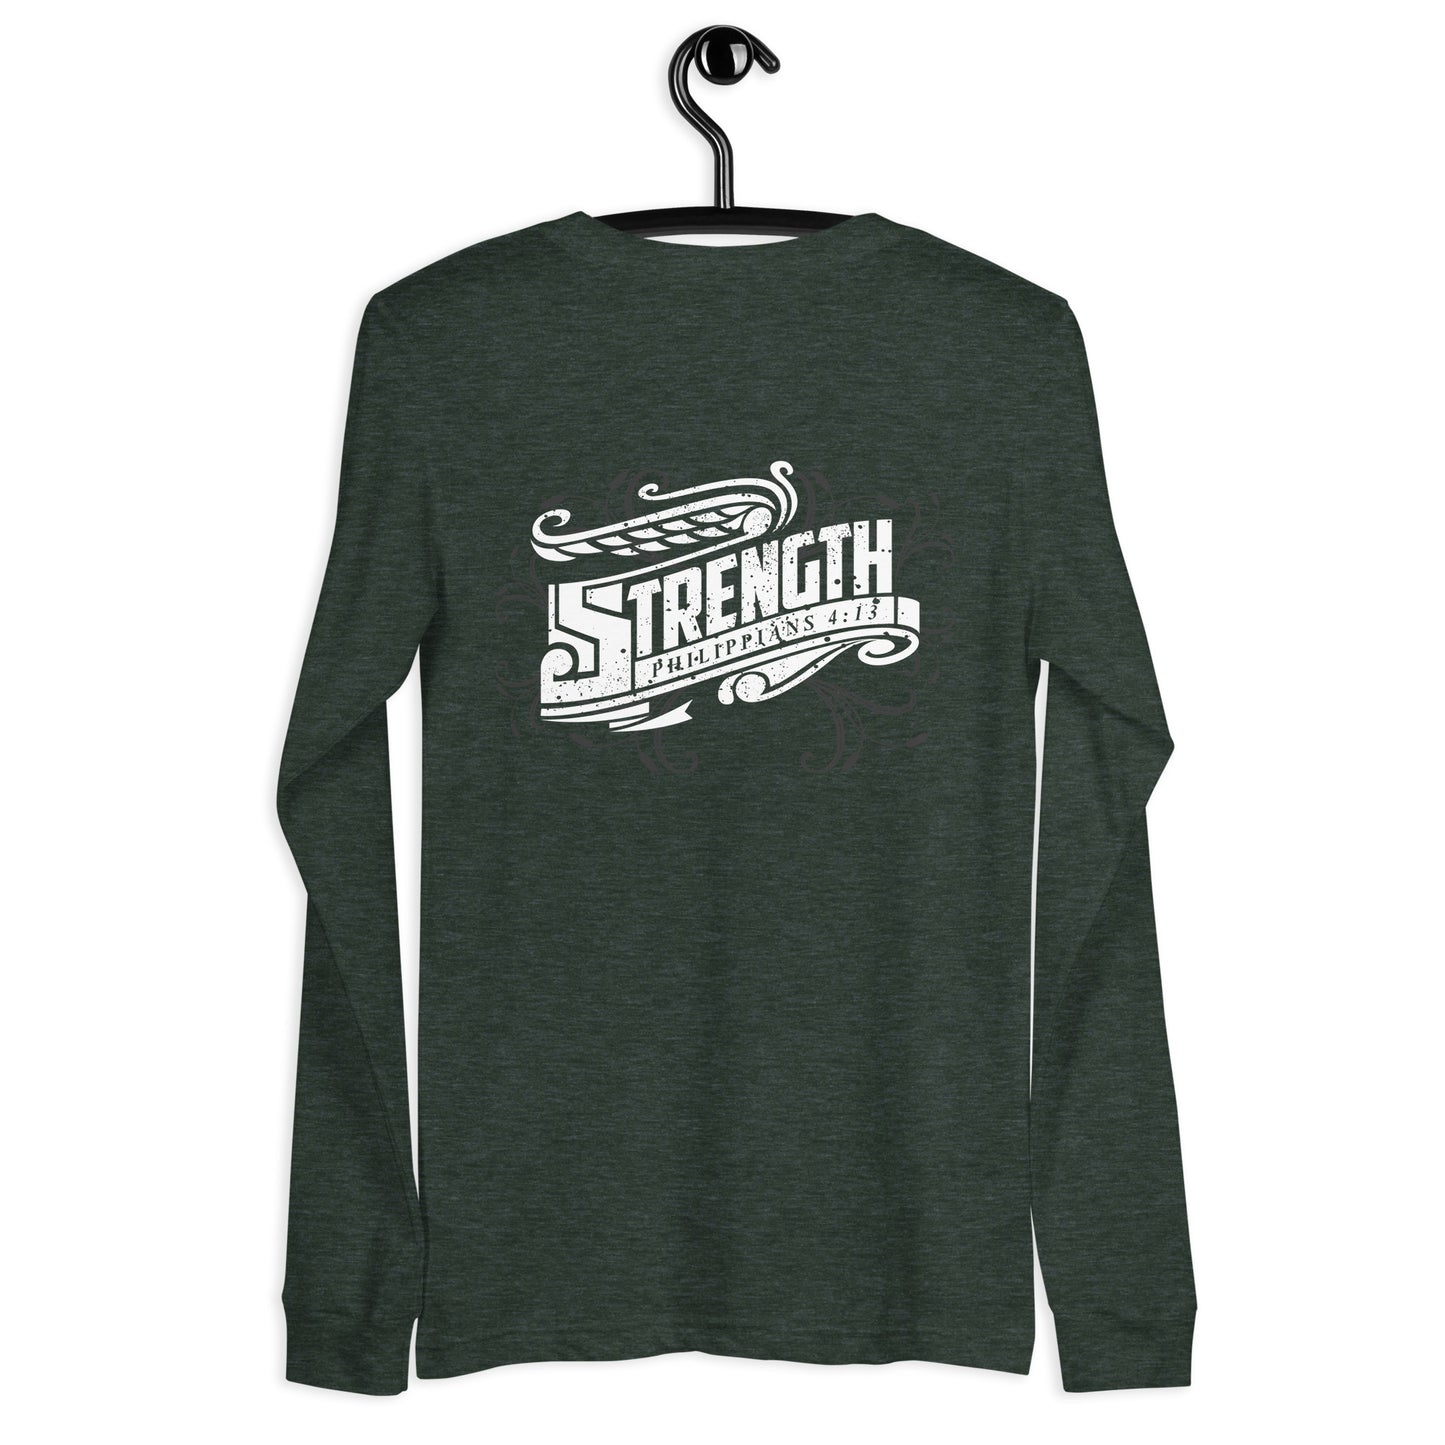 Strength - Unisex Long Sleeve Tee - View All Colors